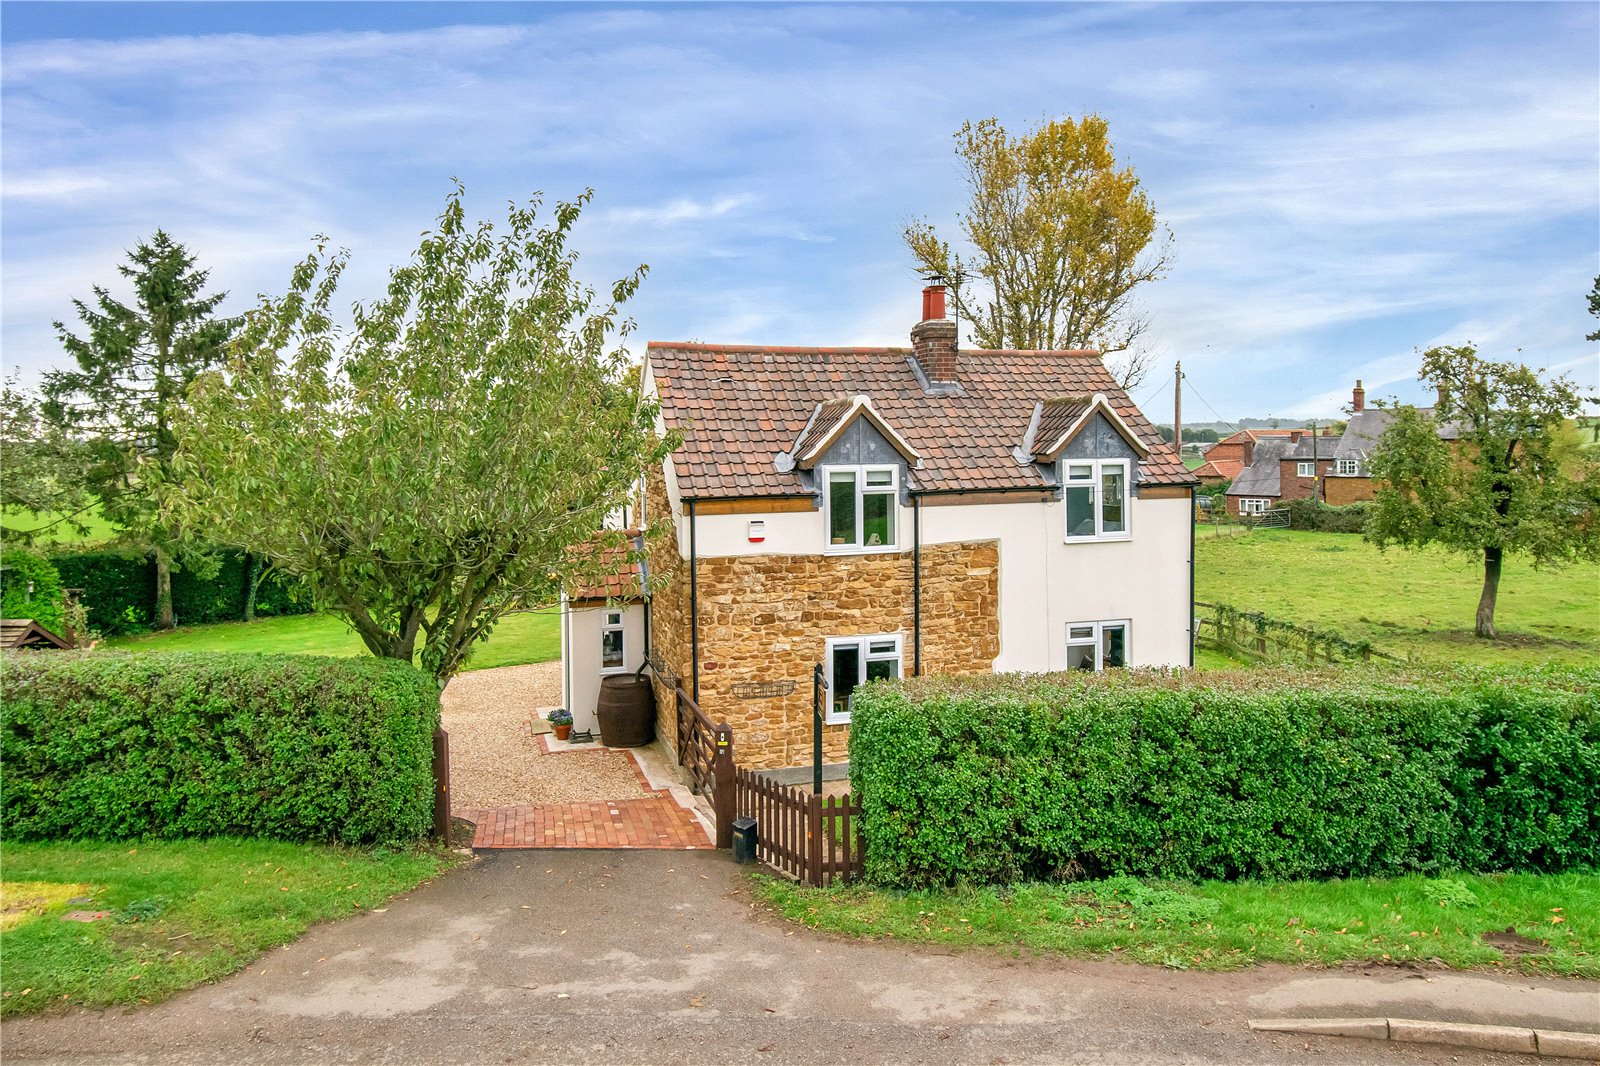 charming period cottage in countryside in Leicestershire